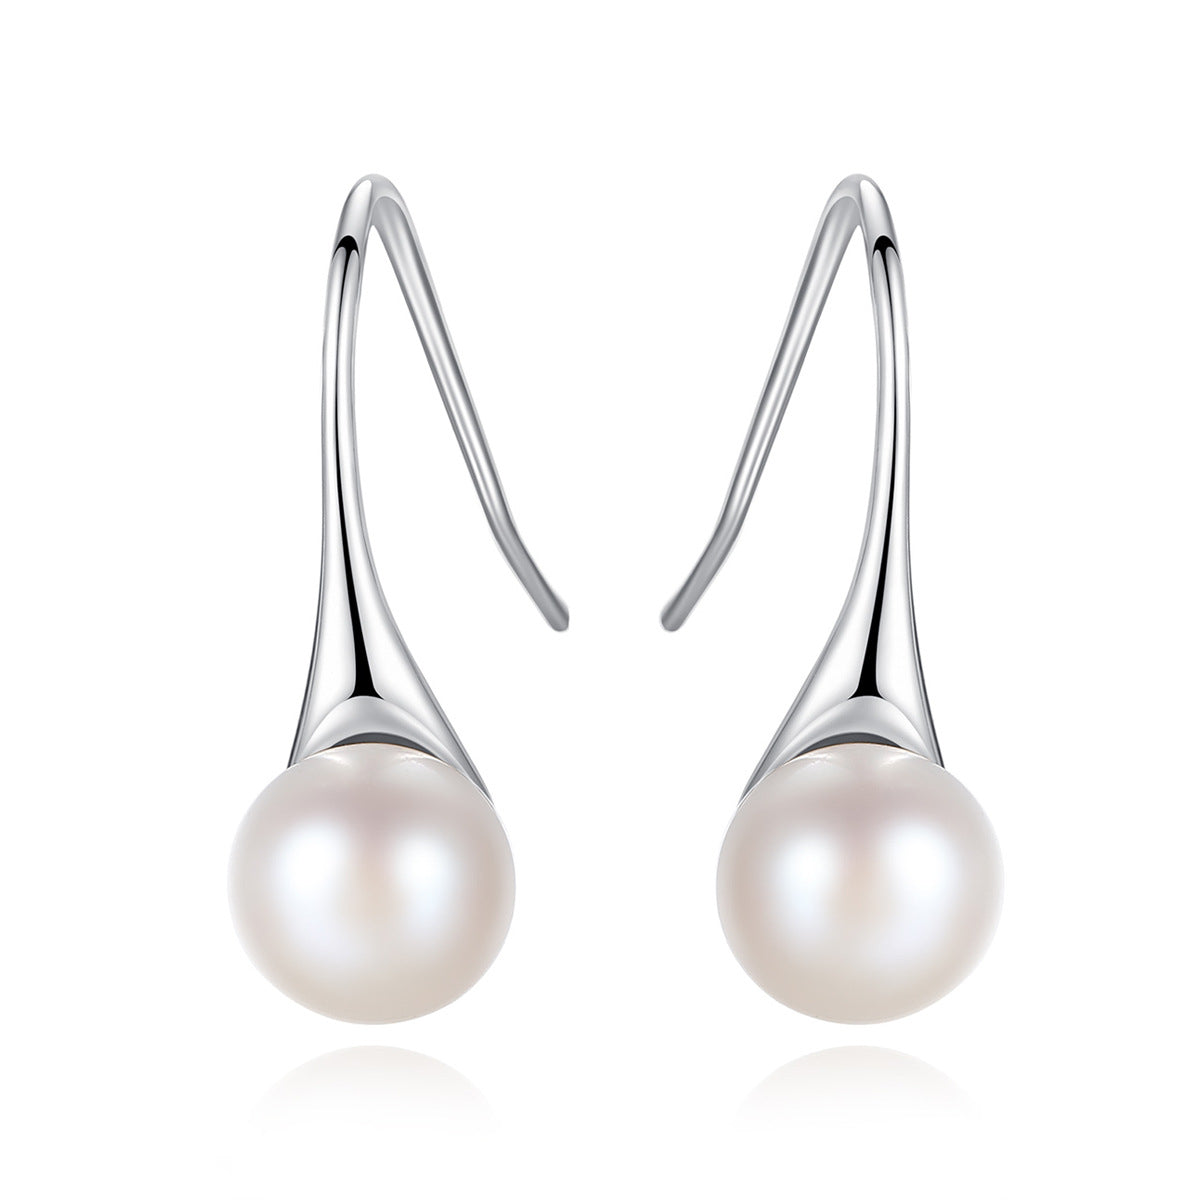 Rhodium Plated On 925 Sterling Silver Peare Drop Earrings